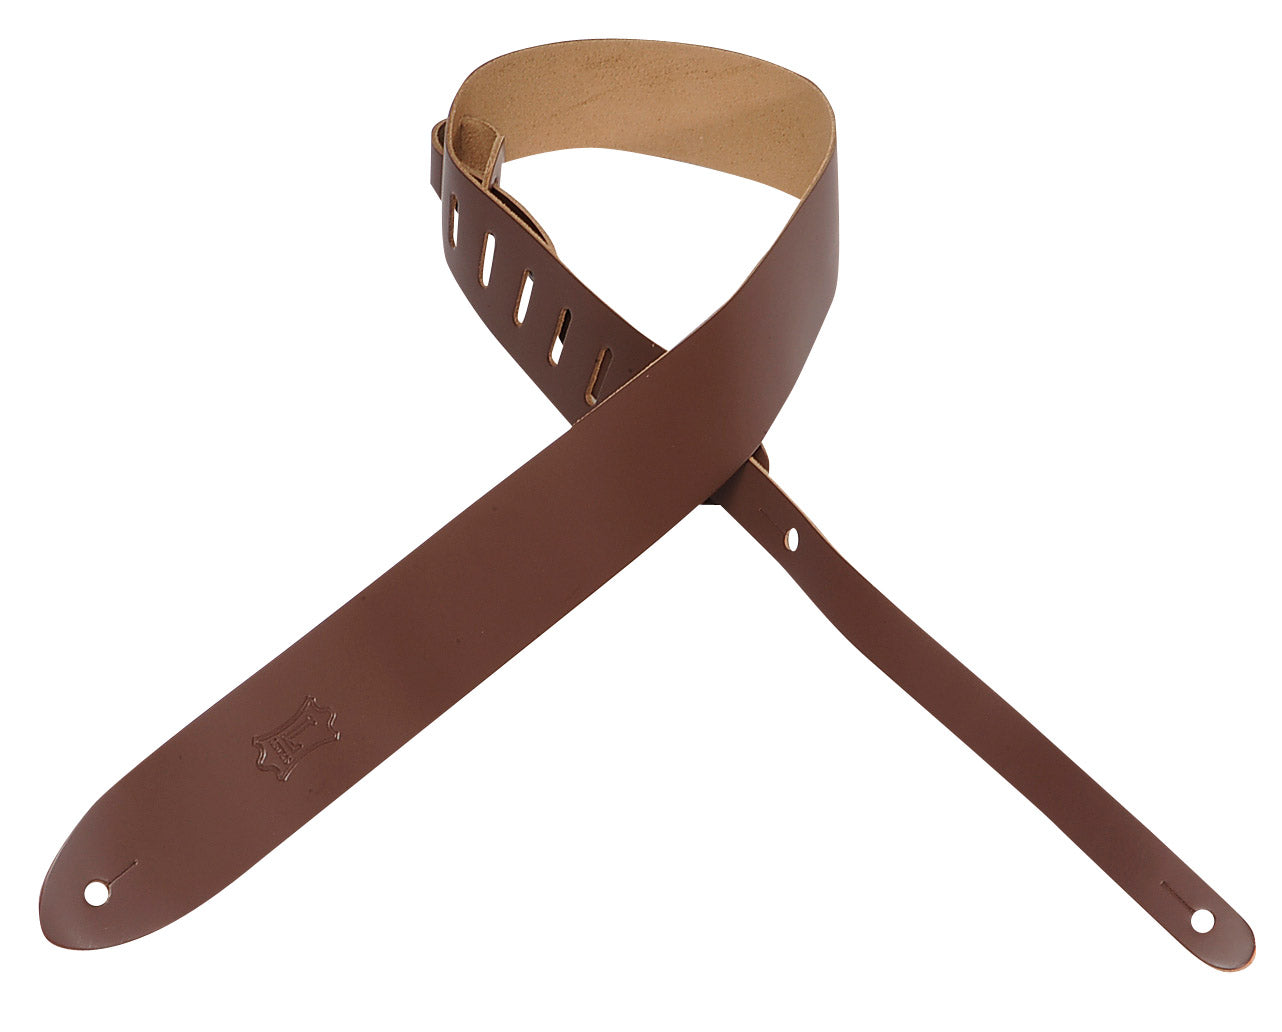 LEVY'S M12-BRN 2" LEATHER GUITAR STRAP BROWN